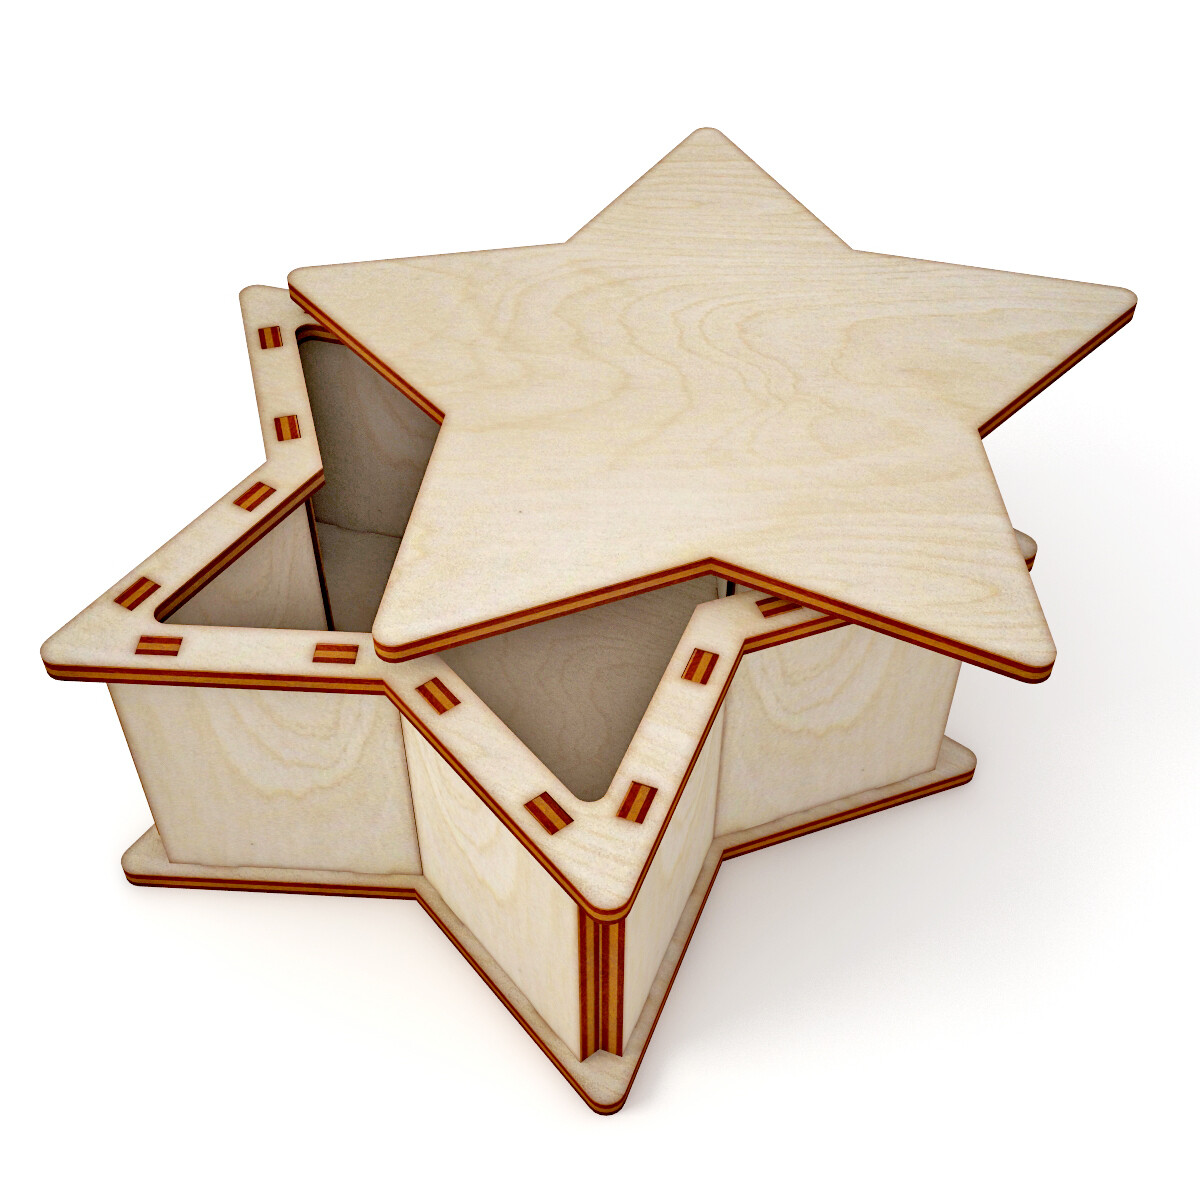 Laser Cut Wooden Star Gift Box Free Vector File